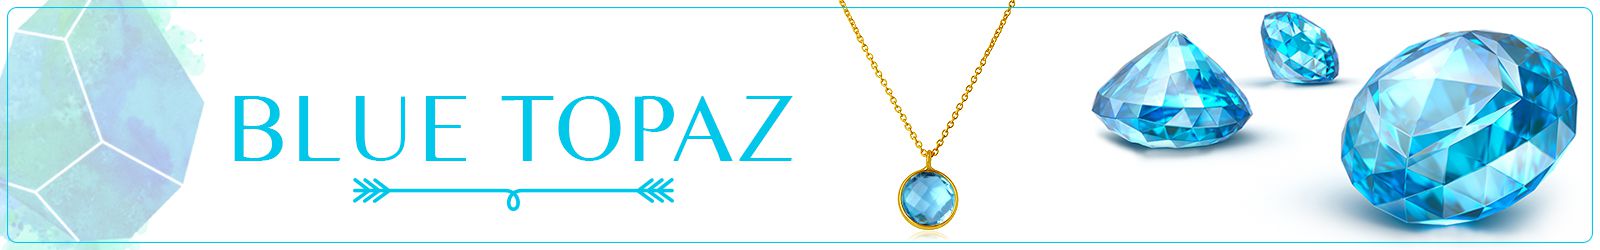 Online Wholesale Blue Topaz Silver Jewelry Store, Shop in Jaipur